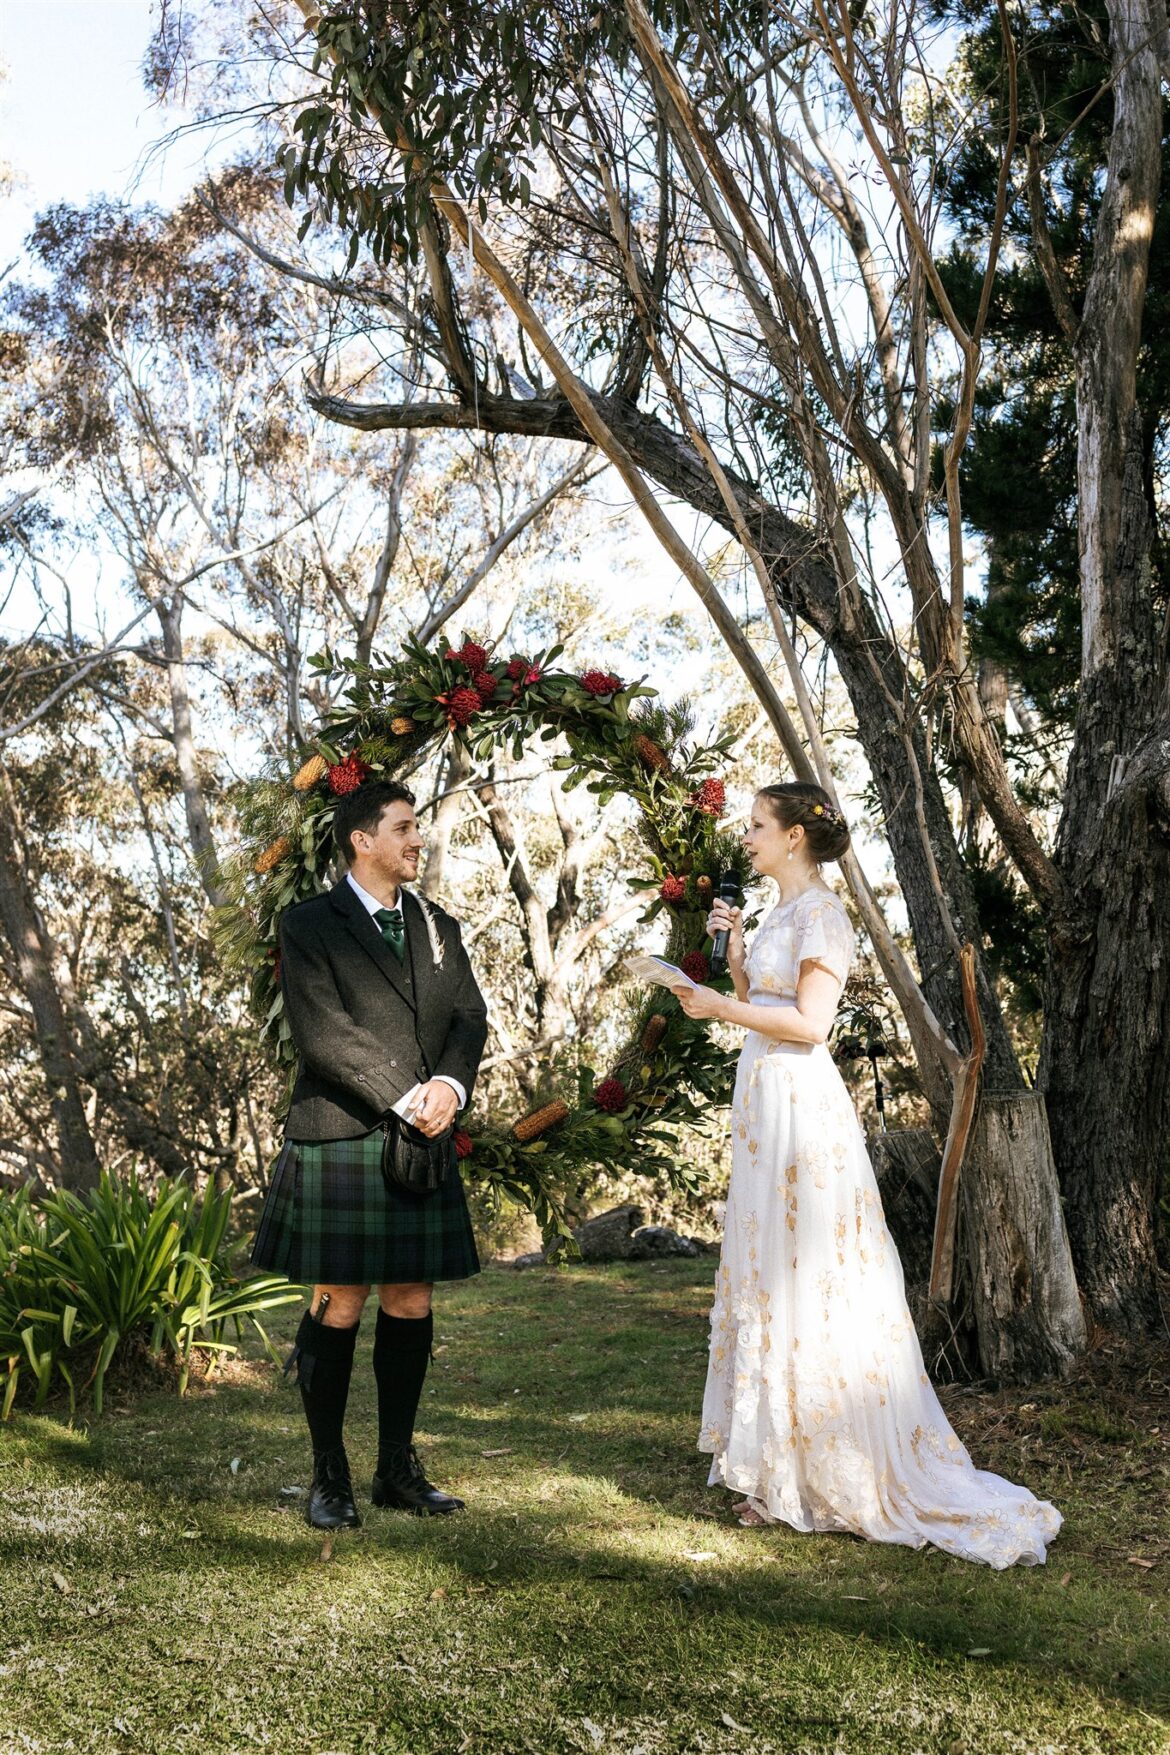 A groom wearing a kilt and a bride wearing a vintage wedding dress both read their vows to each other in their wedding ceremony in the Blue Mountains